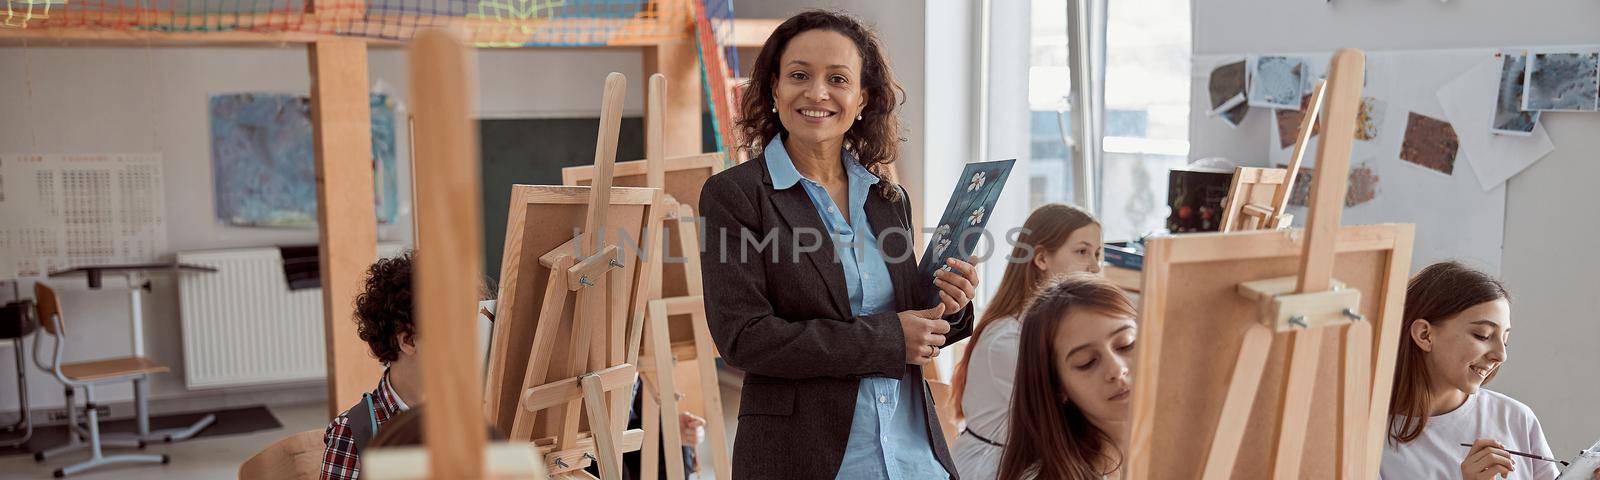 Portrait of smiling female arfican american teacher in modern classroom with kids drawing lesson in background.